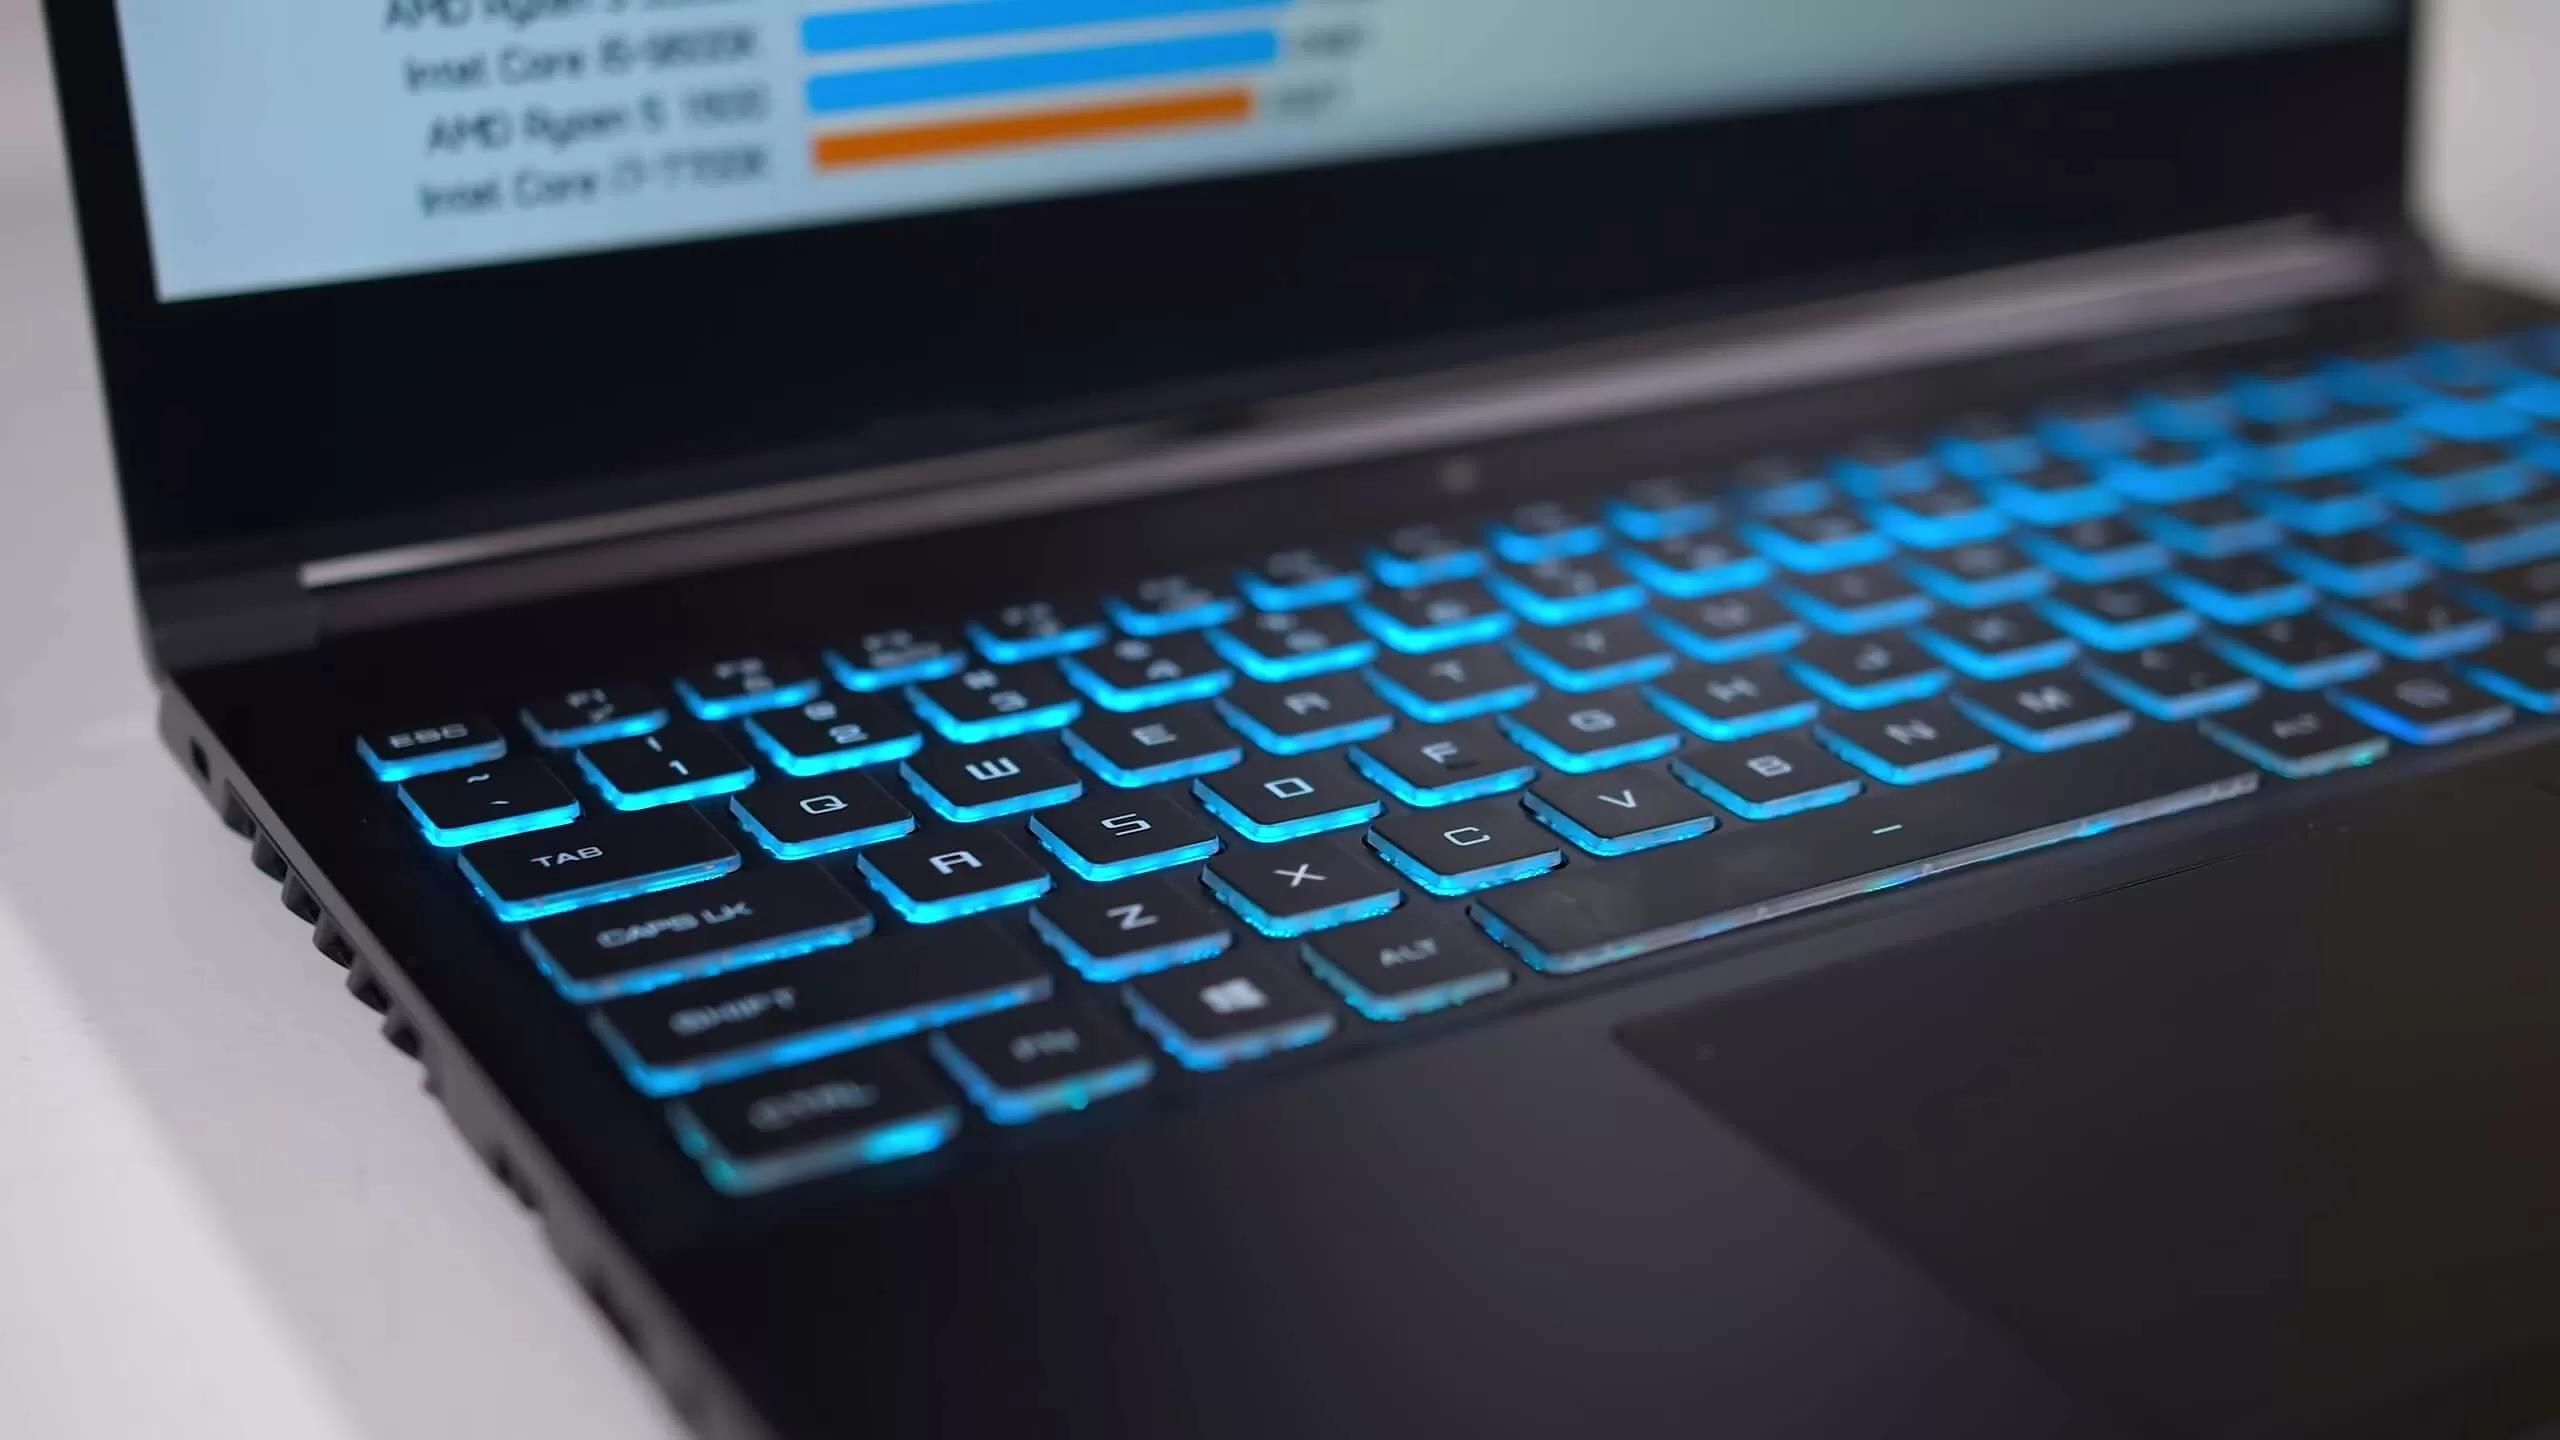 Intel Laptops That Will Keep Up With Your Creativity